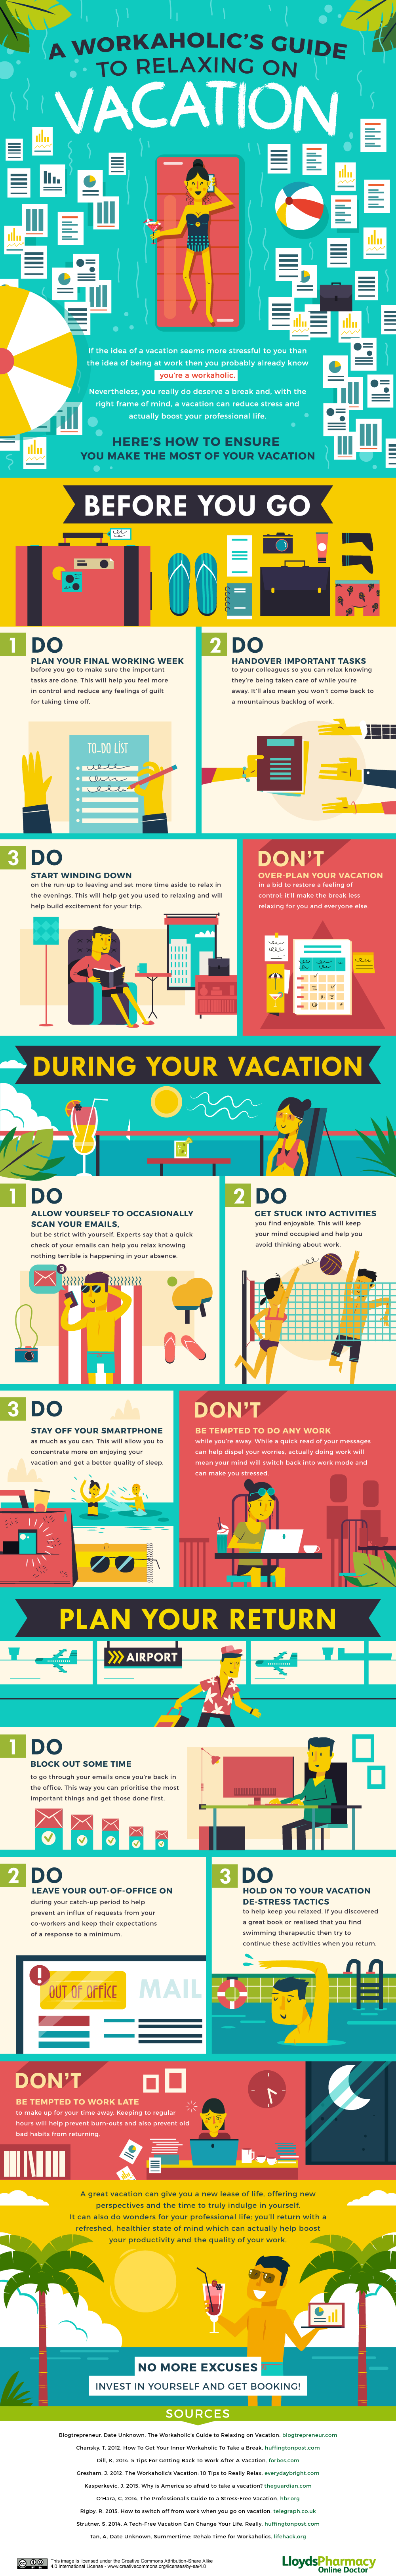 workaholics-guide-vacation-infographic.png